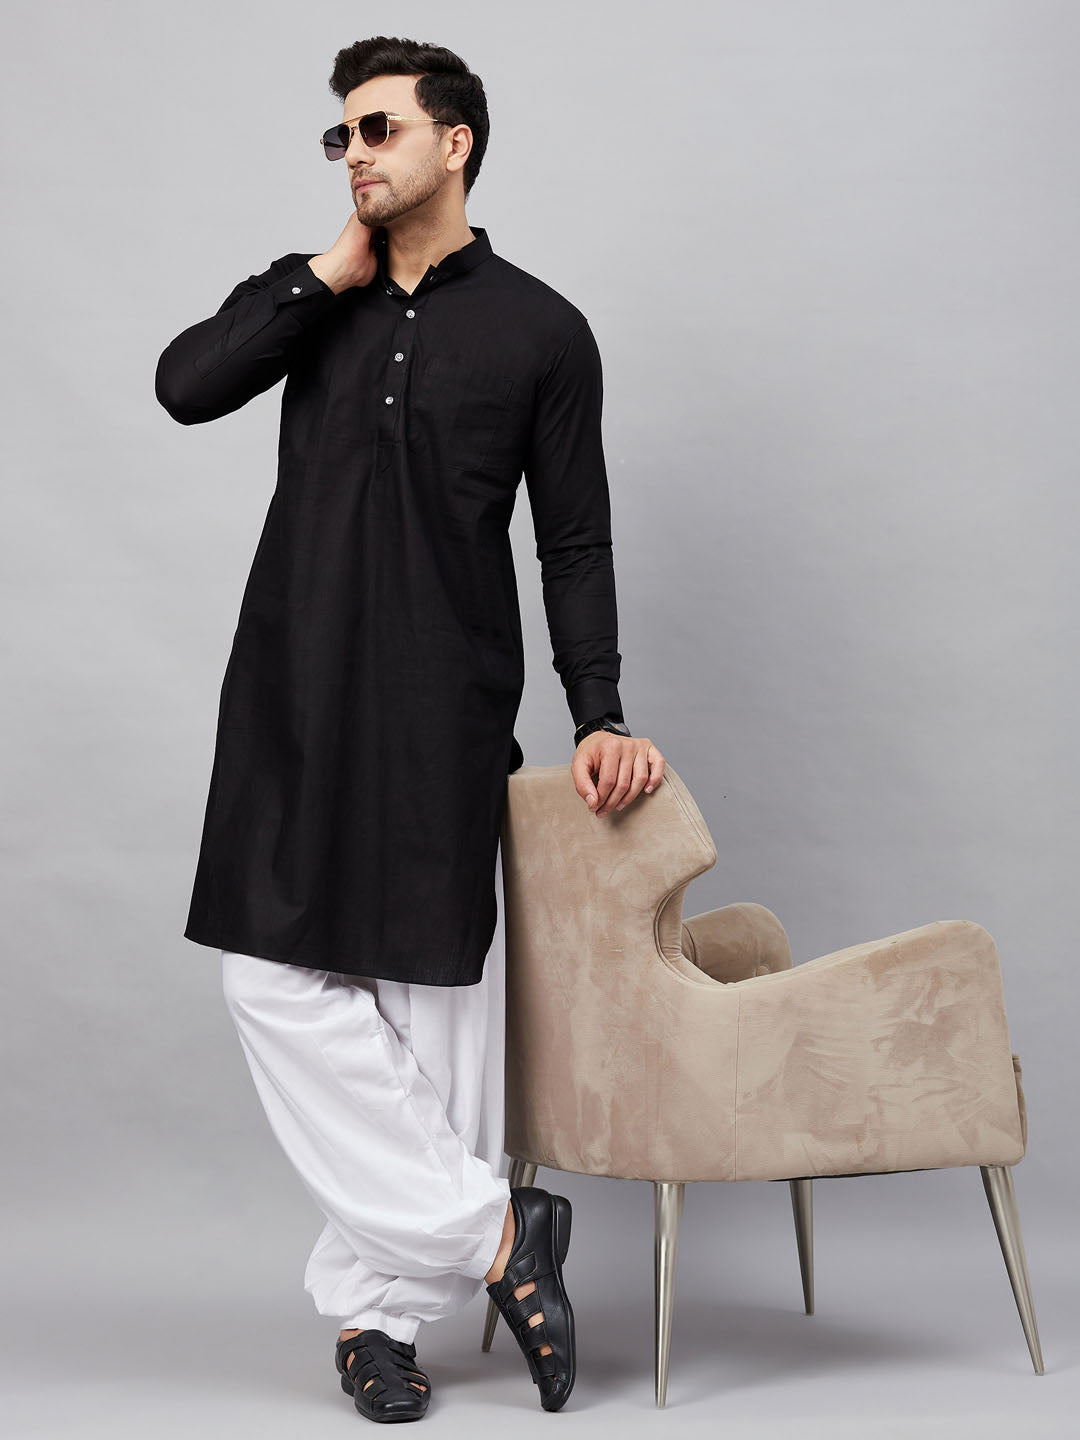 Buy Men's Clothing, Accessories and Footwear Online at Fabindia